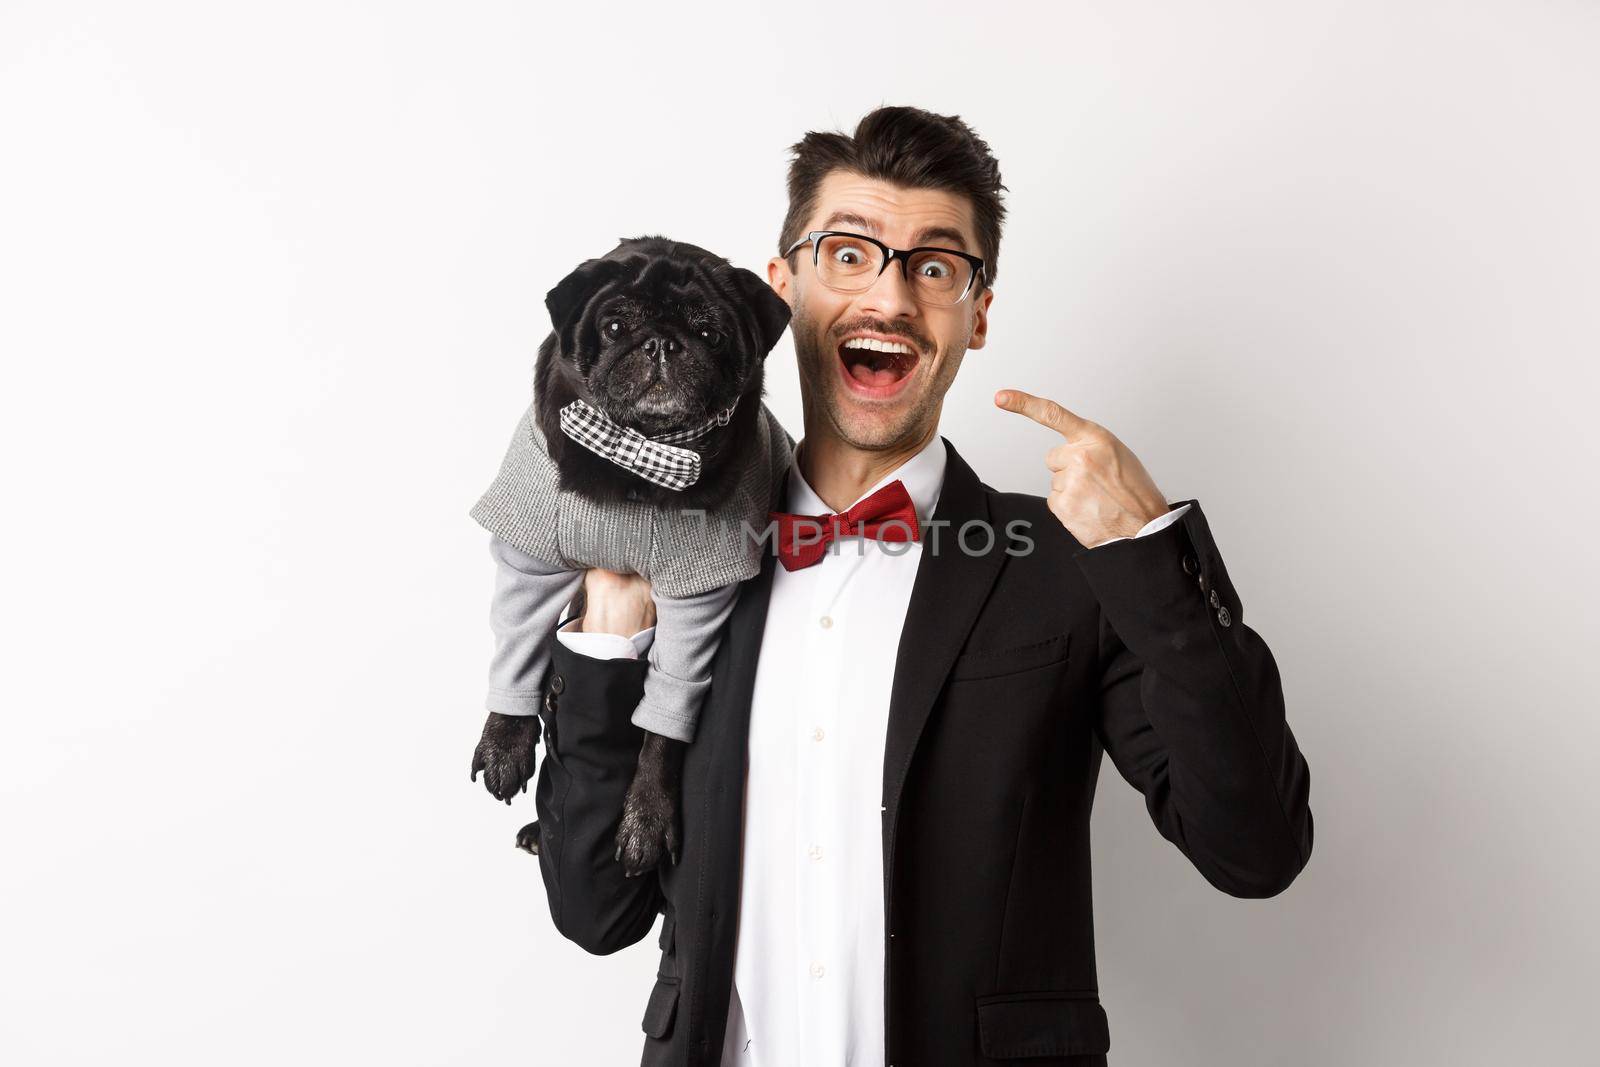 Amazed dog owner pointing at his cute black pug, smiling happy, puppy wearing costume, white background.